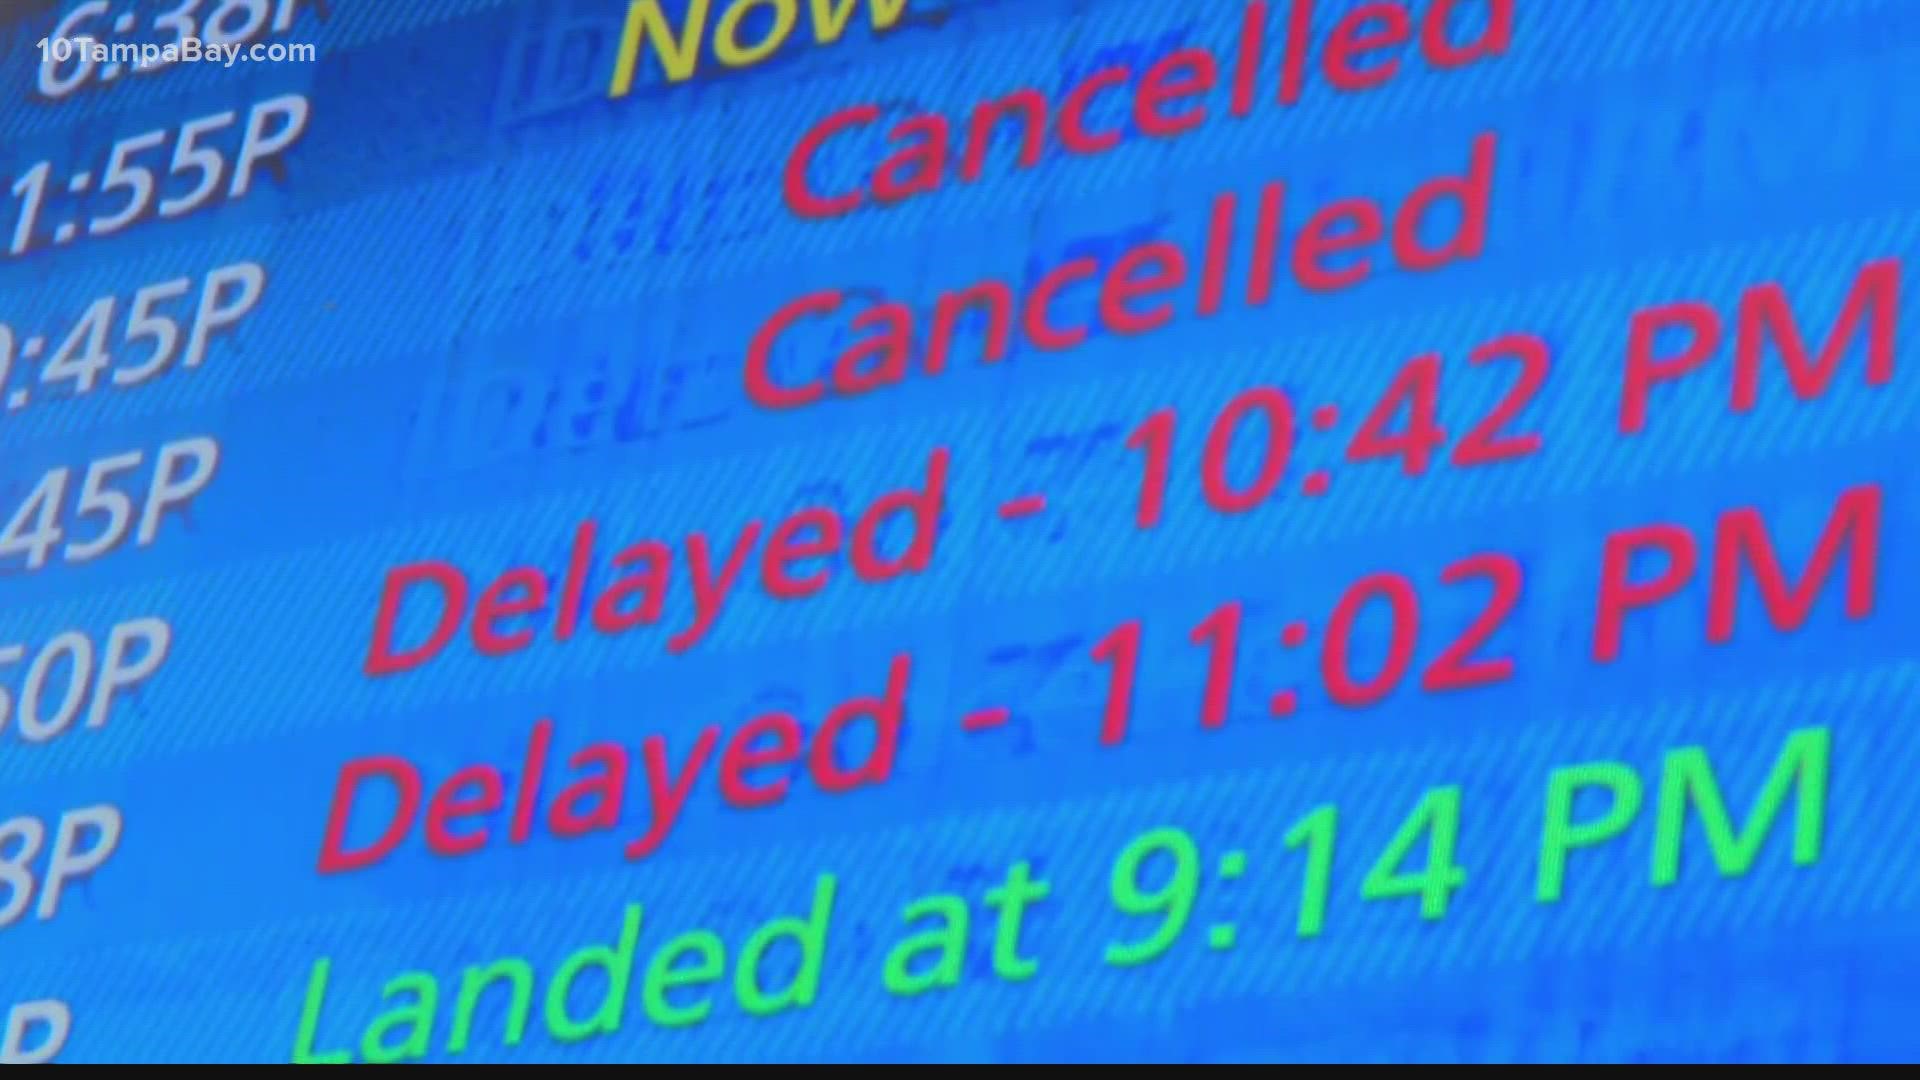 Air Traffic Control issues and disruptive weather have led to many canceled Southwest Airlines flights.